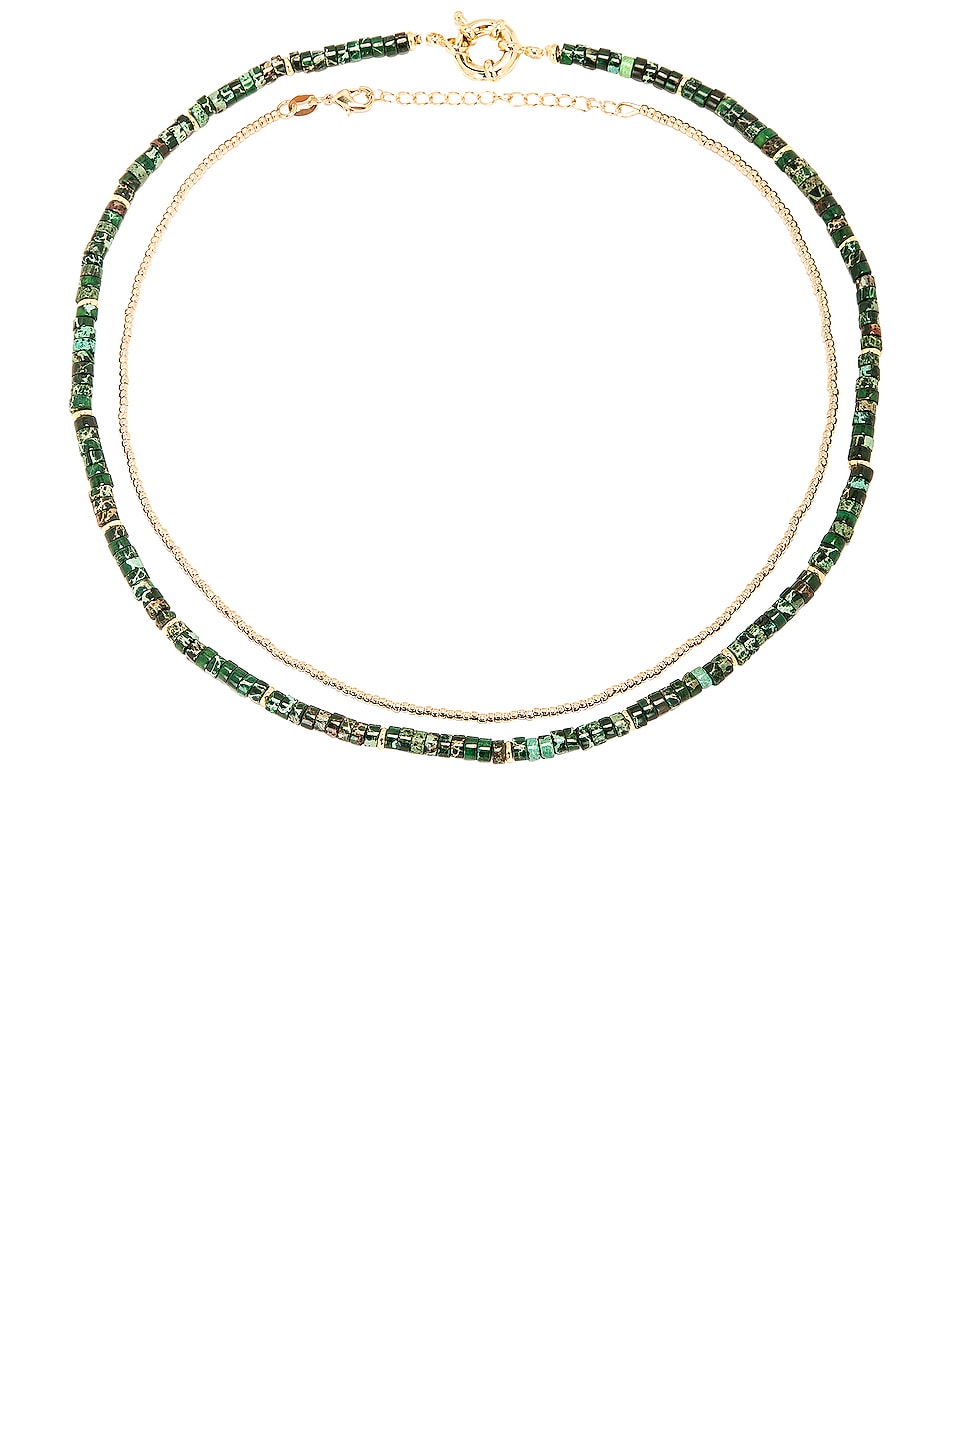 Image 1 of Jordan Road Jewelry Paradis 2 Stack Necklace in 18k Gold Plated Brass & Malachite